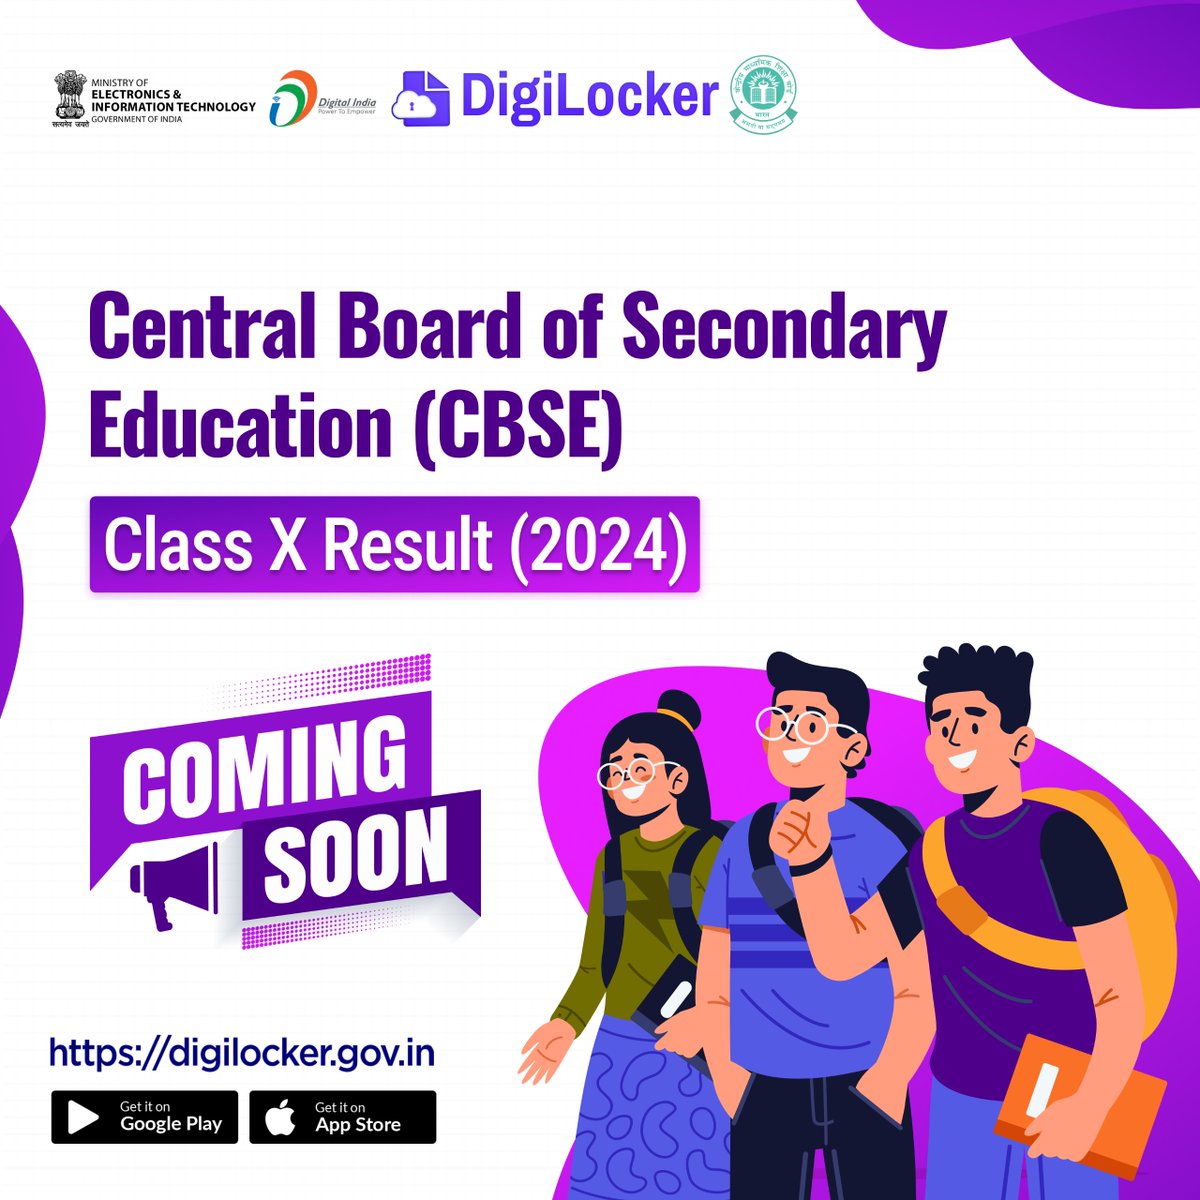 Exciting news for #CBSE Class X 2024 students! Prepare for your upcoming results, as #DigiLocker has set up a special platform for you to easily access your results. Don't miss out - visit cbseservices.digilocker.gov.in/activatecbse to get started! #comingsoon #classX